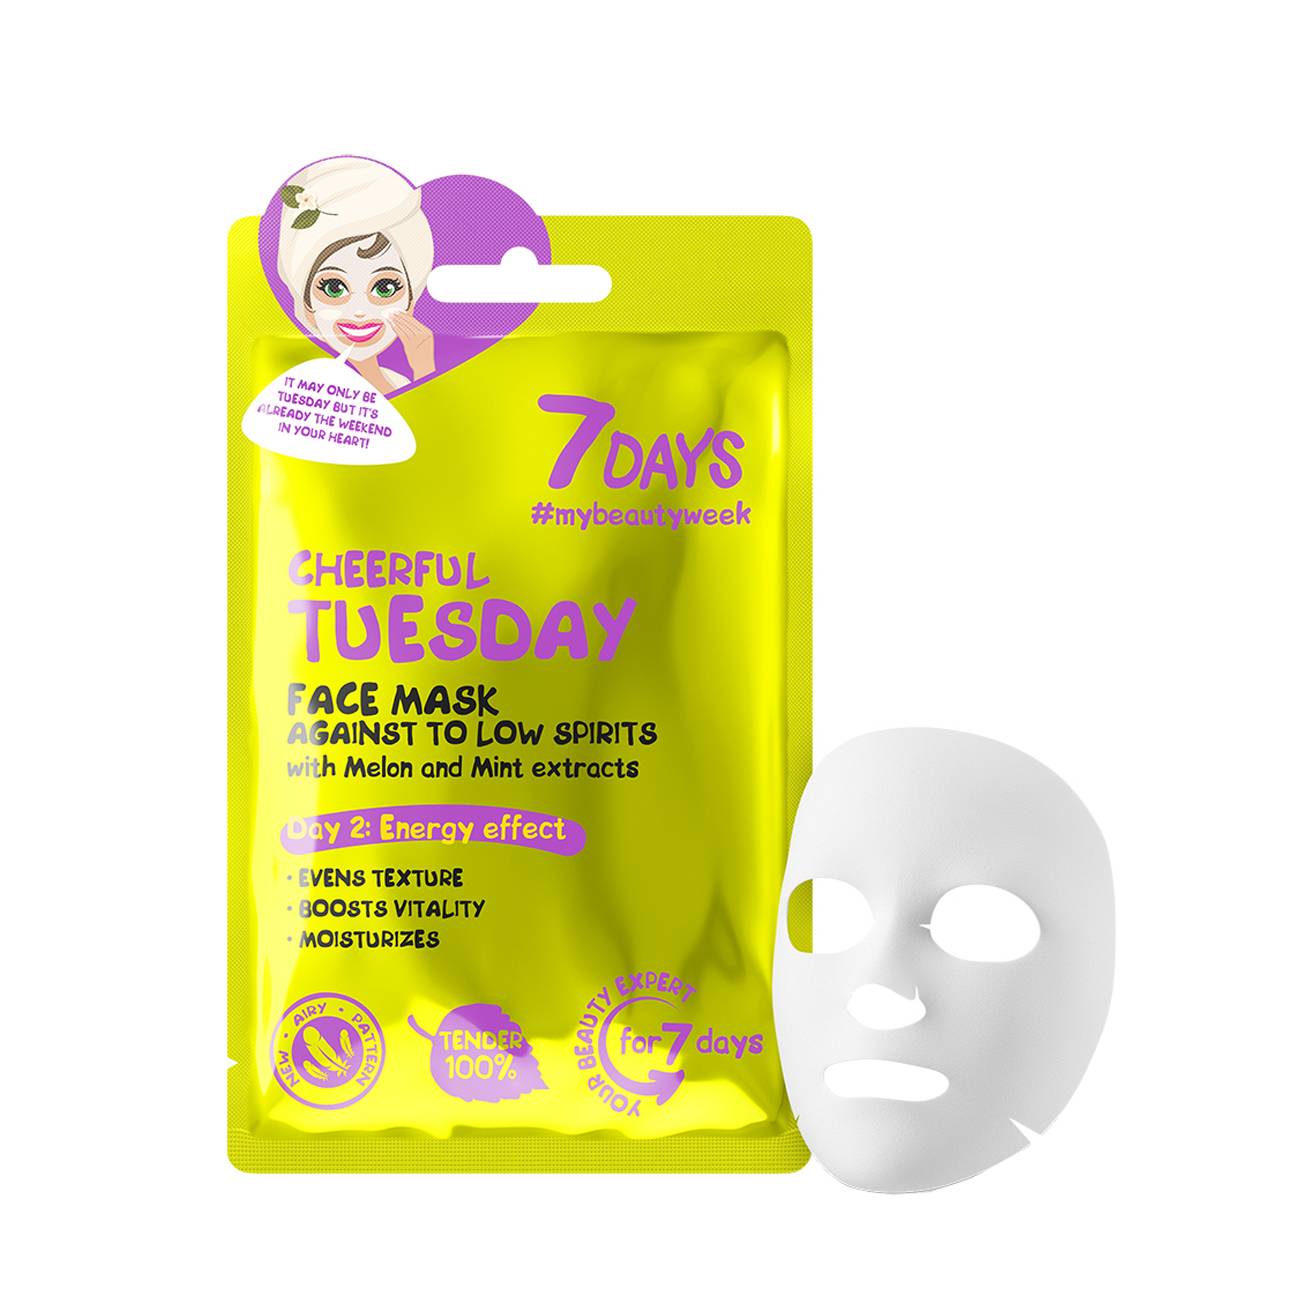 Cheerful Tuesday – Face Sheet Mask Against Low Spirits With Melon& Mint 28 gr 7 Days